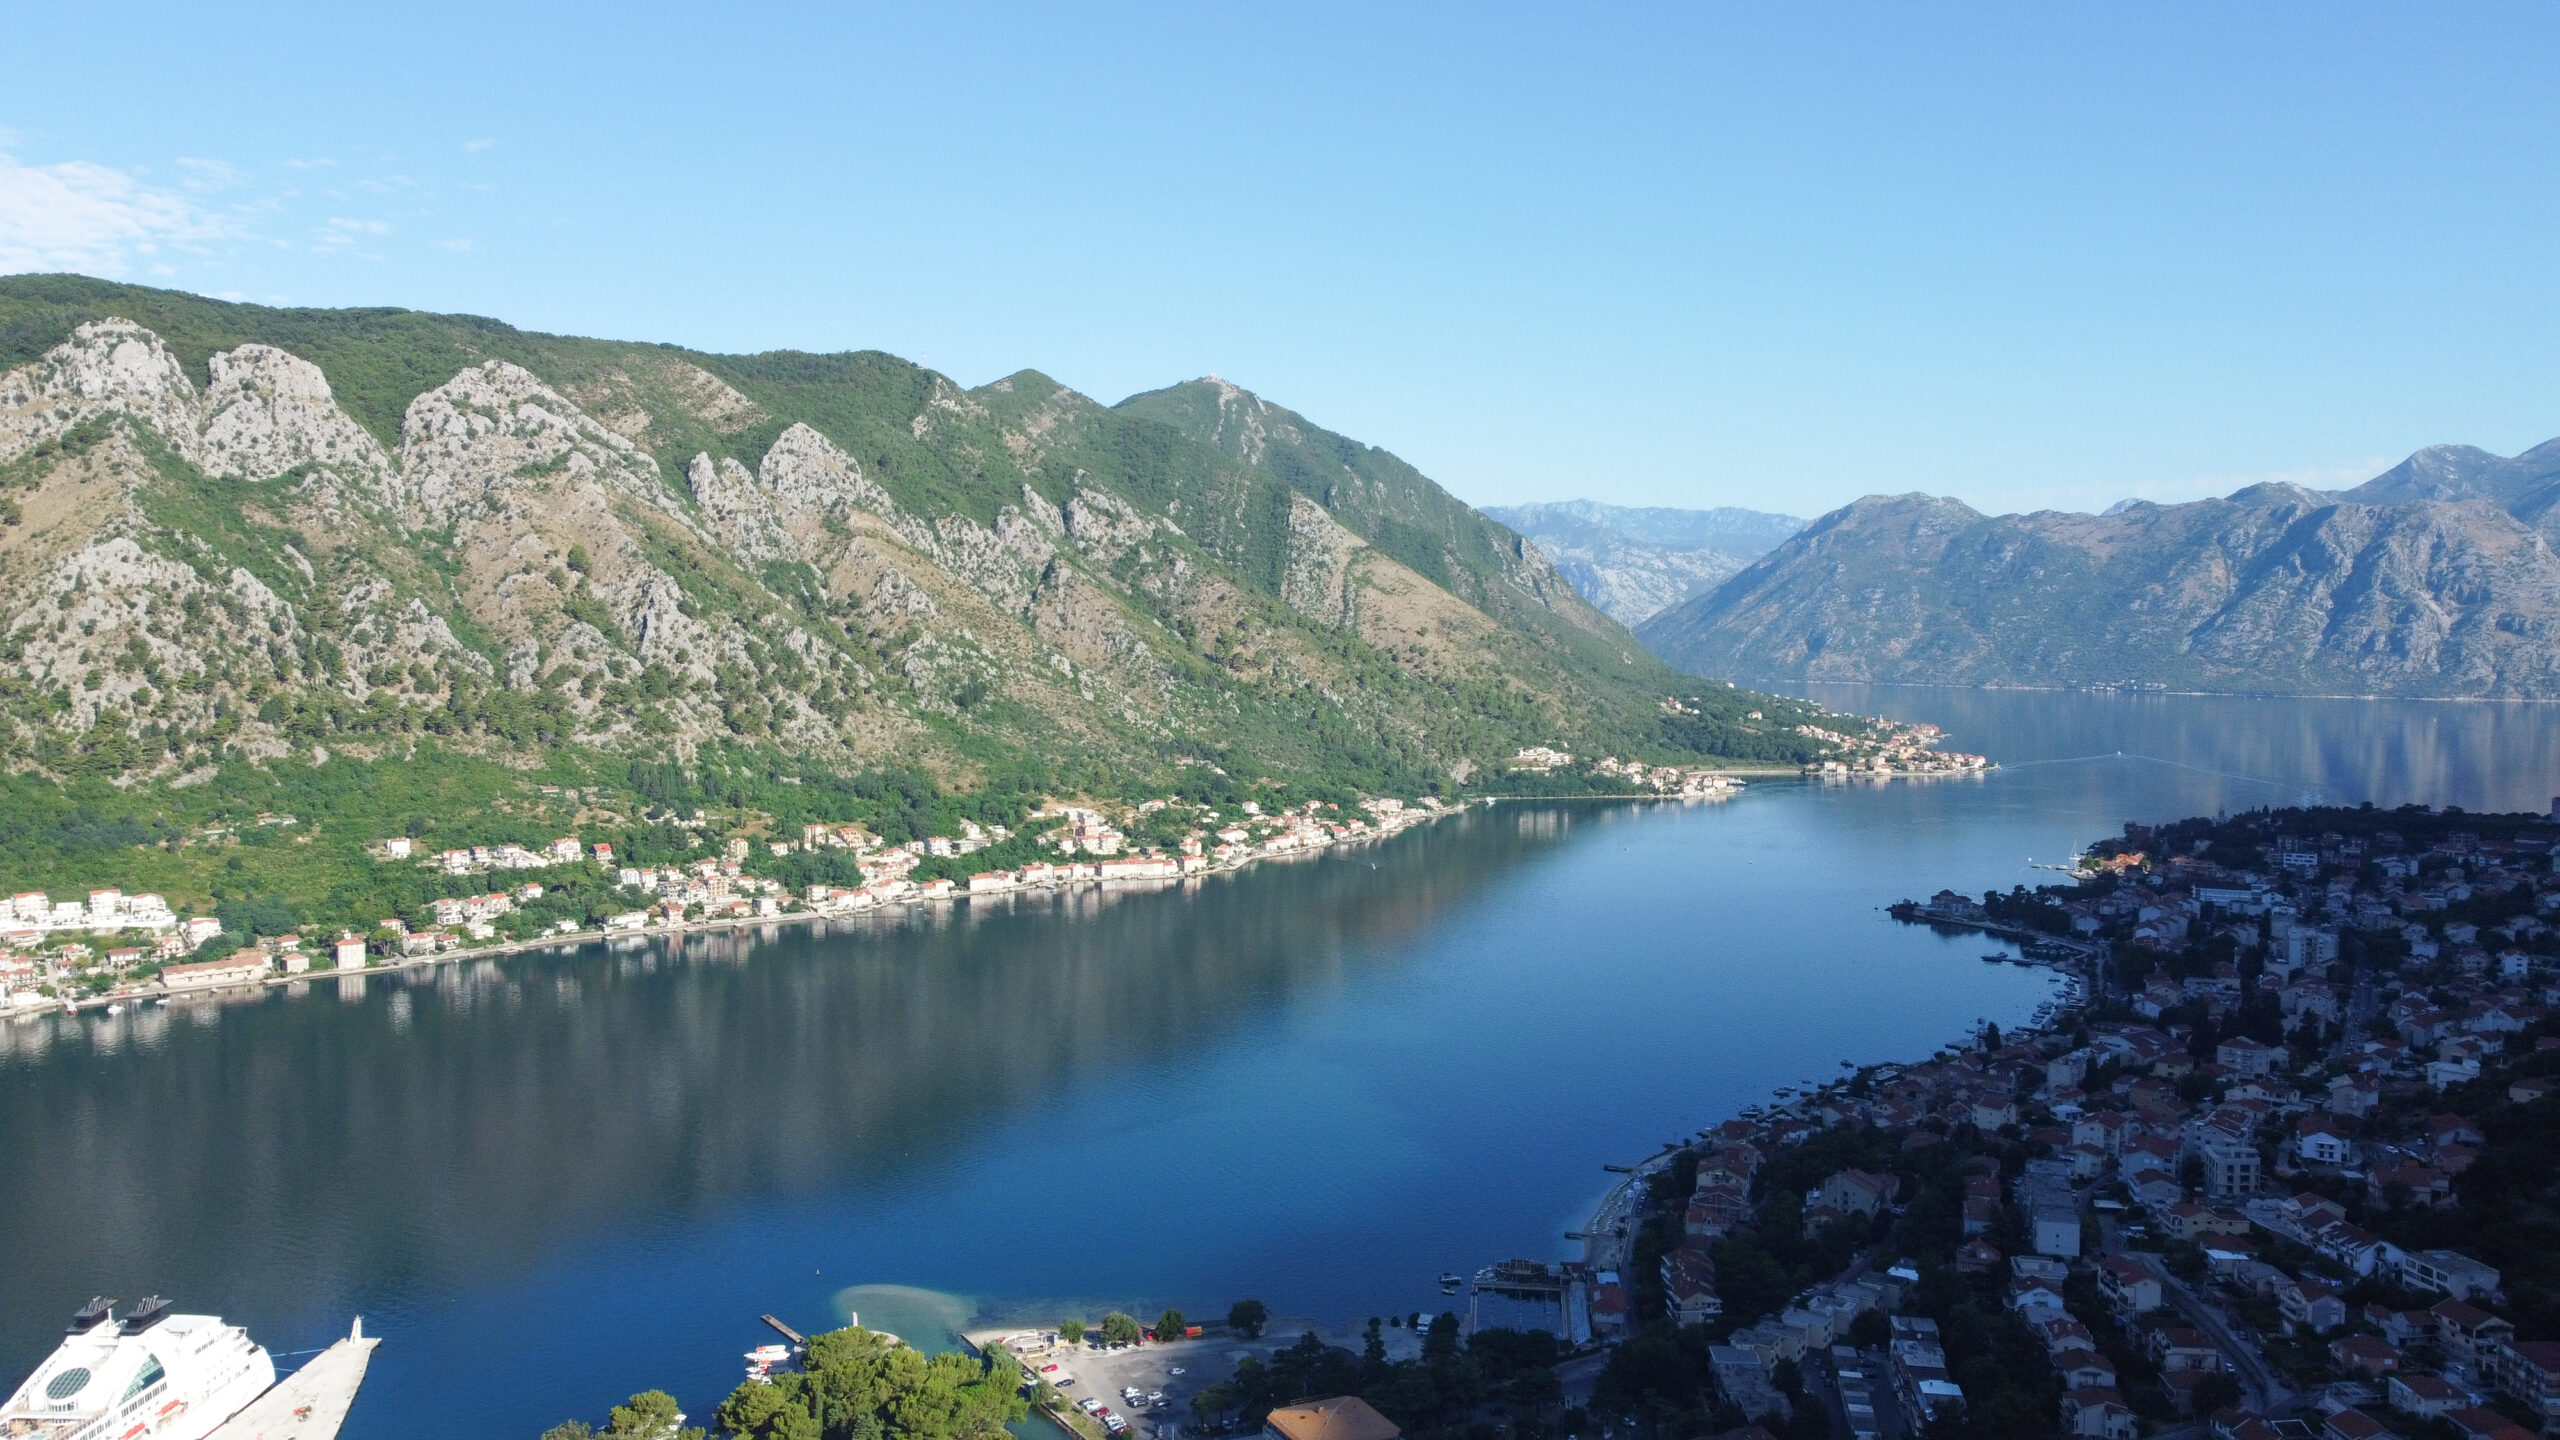 Hiking to Montenegro's Kotor Fortress – Travels With Tricia